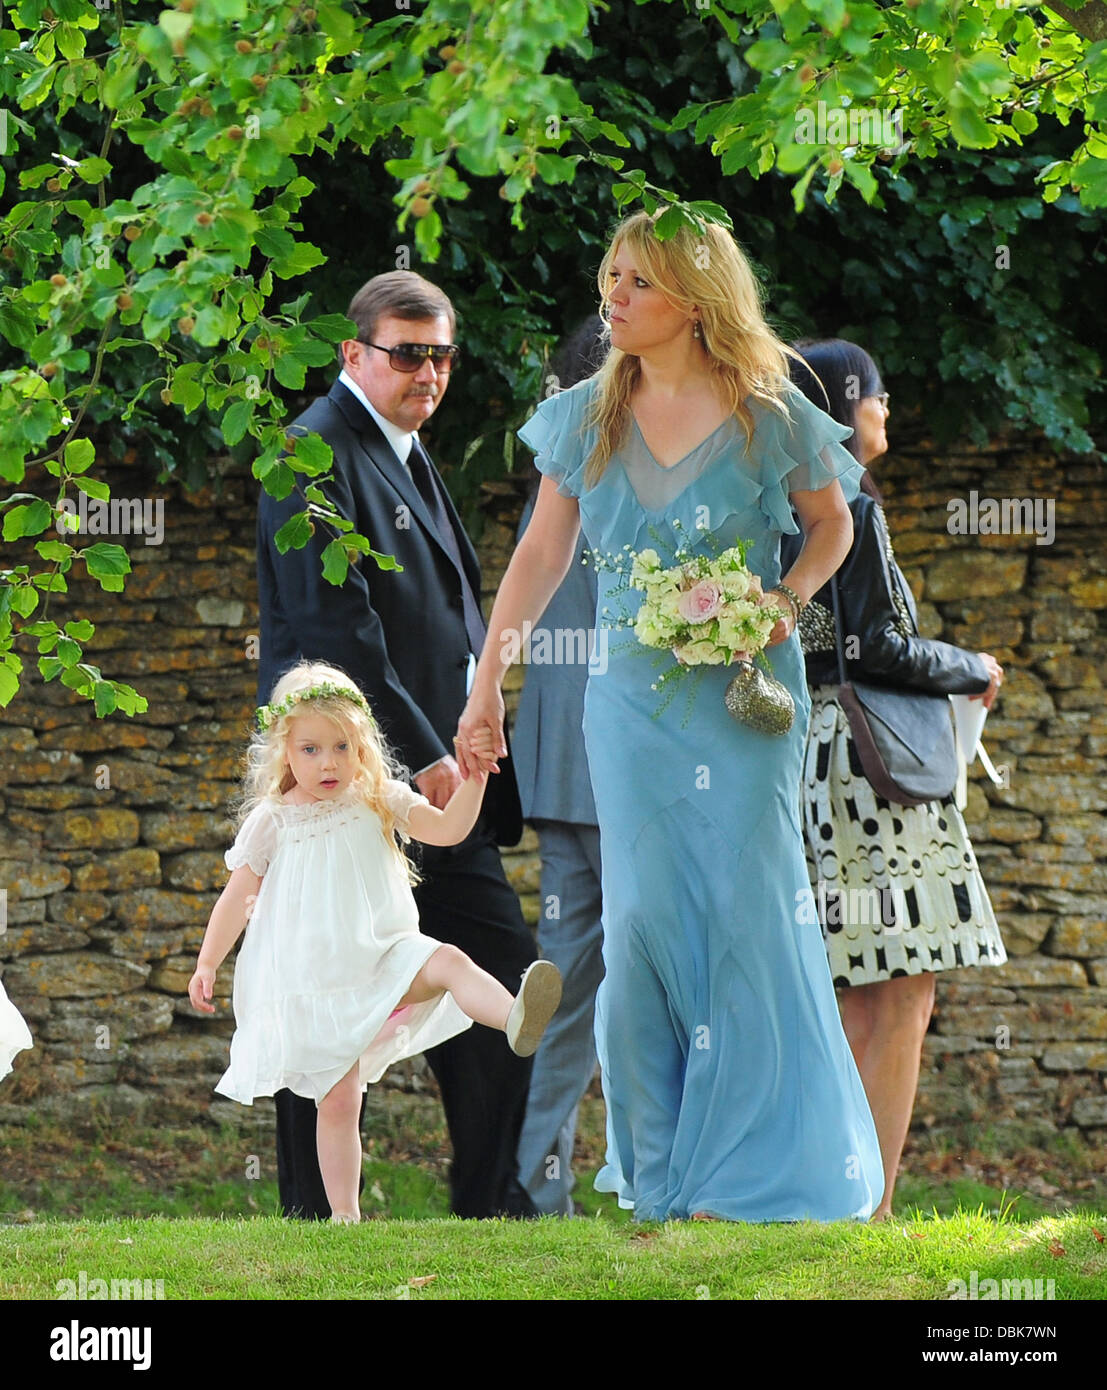 Bridesmaid and Flower Kate and Jamie Hince's Kate Moss Wedding Day in Cotswolds Cotswolds, England - 01.07.11 Stock Photo - Alamy